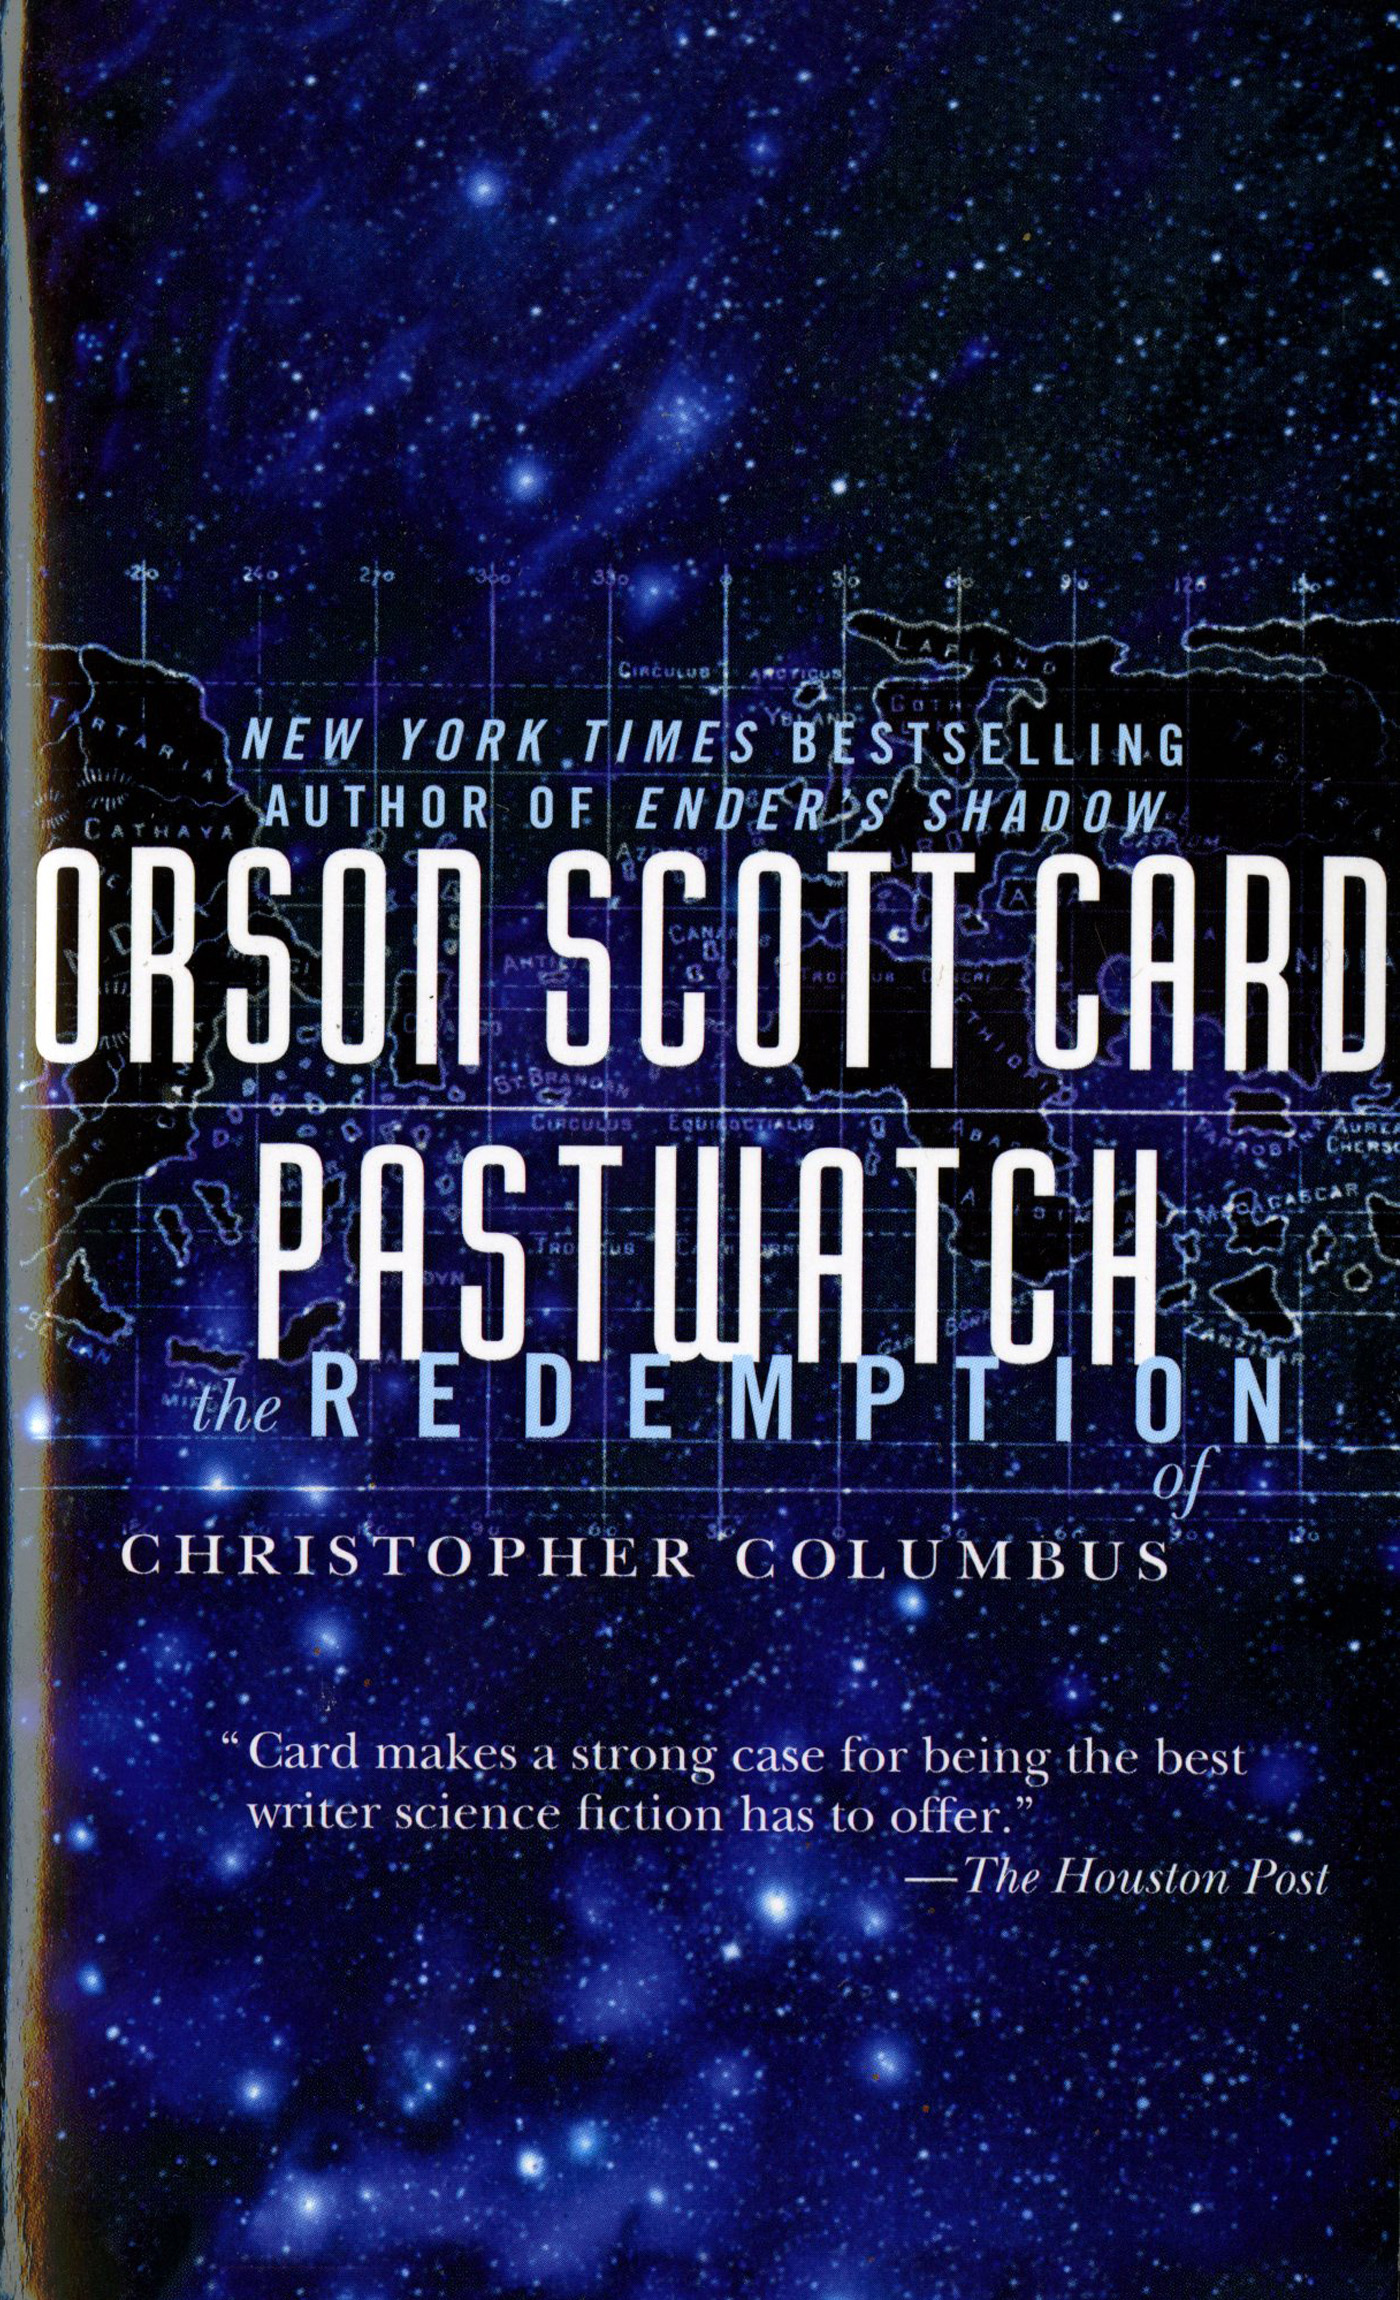 Pastwatch : The Redemption of Christopher Columbus by Orson Scott Card